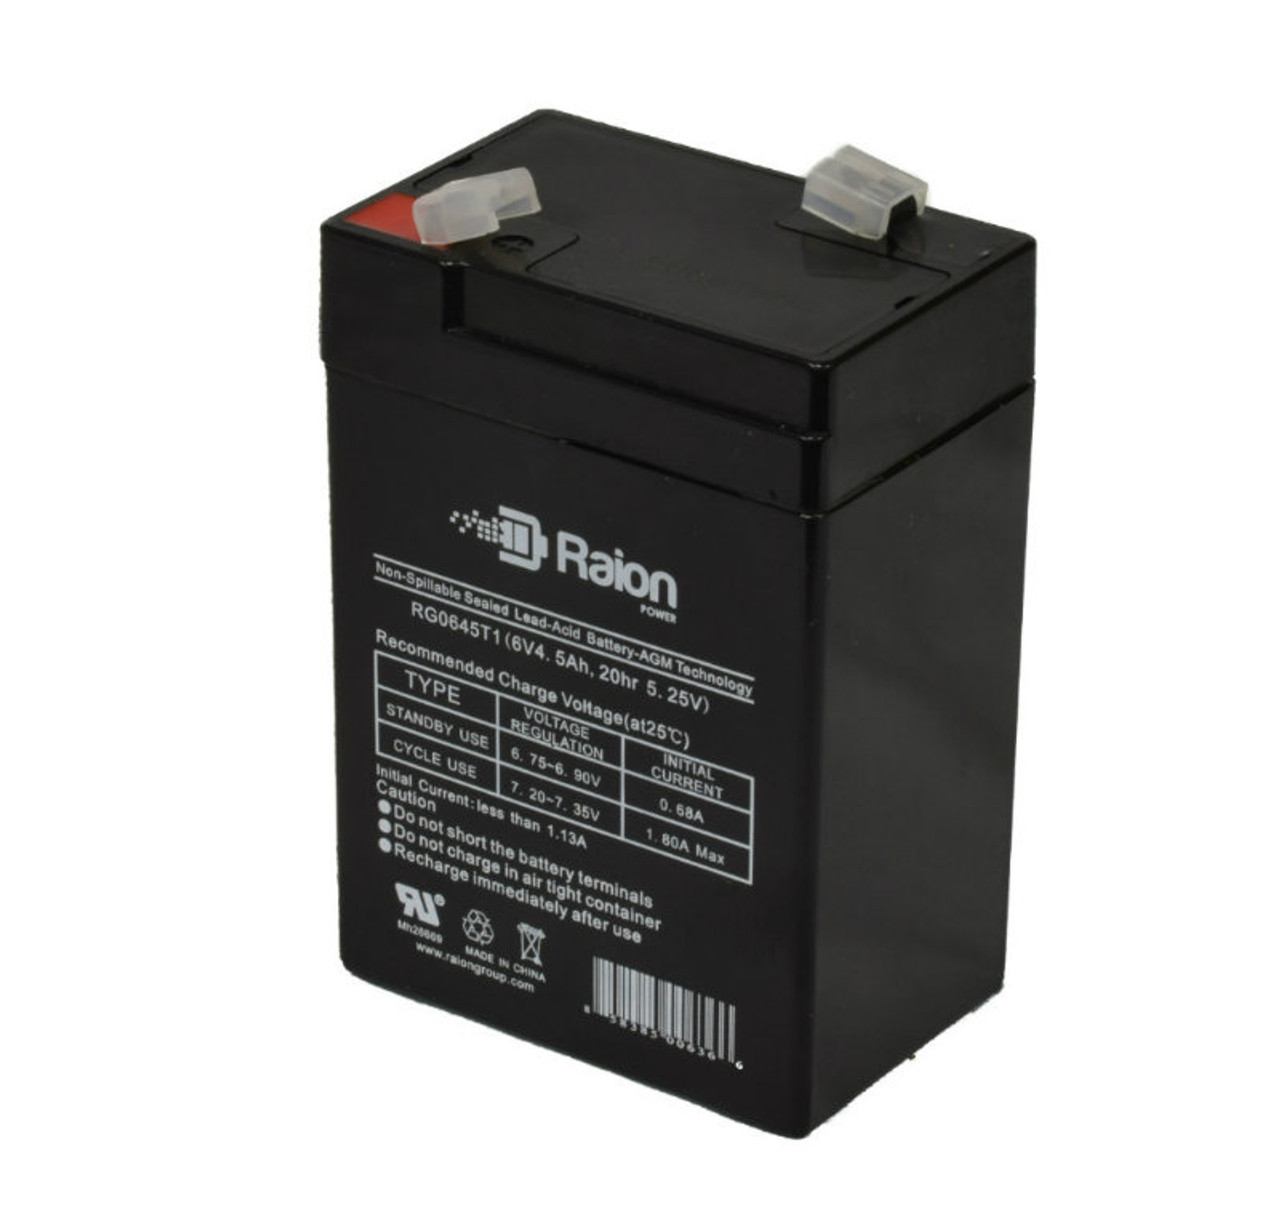 Raion Power RG0645T1 6V 4.5Ah Replacement Battery Cartridge for Chiway SJ6V4.5Ah